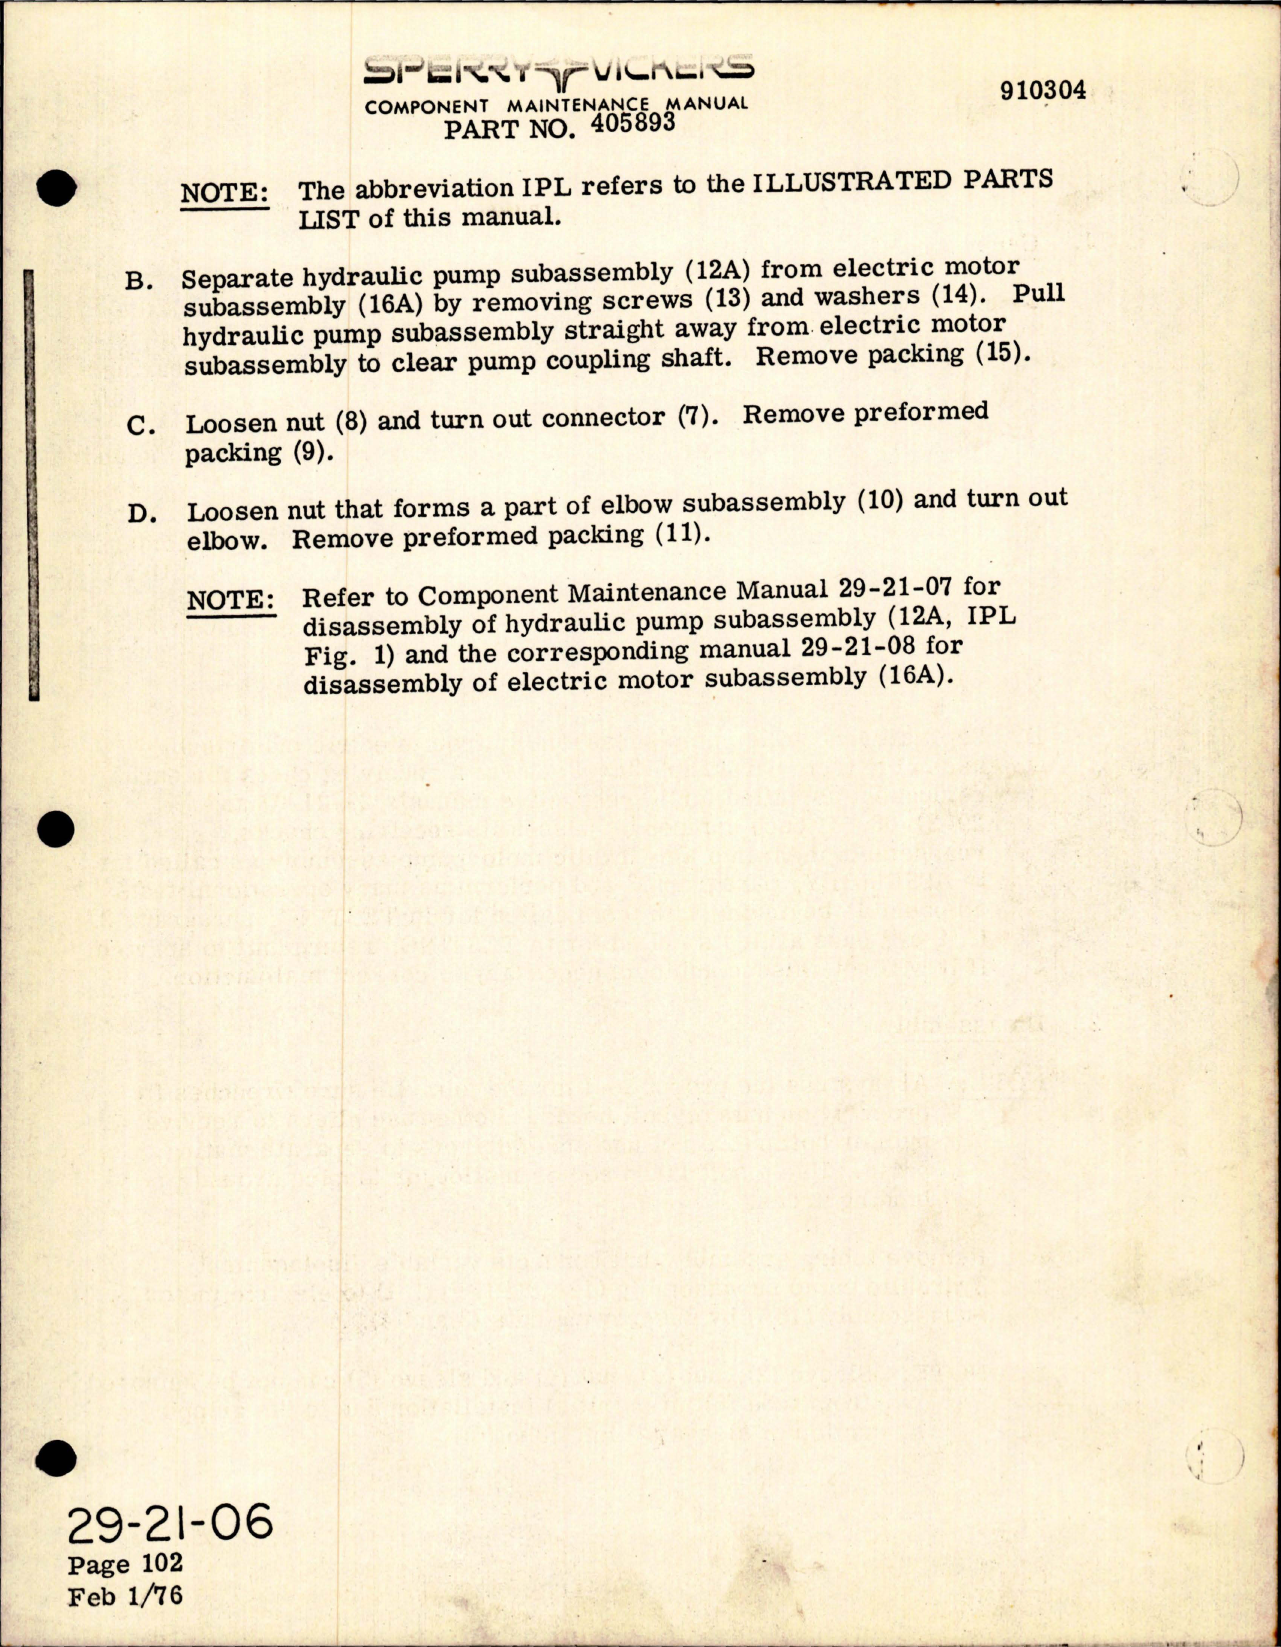 Sample page 9 from AirCorps Library document: Component Maintenance Manuals for Hydraulic Motorpump - Parts 405893 and 414470 